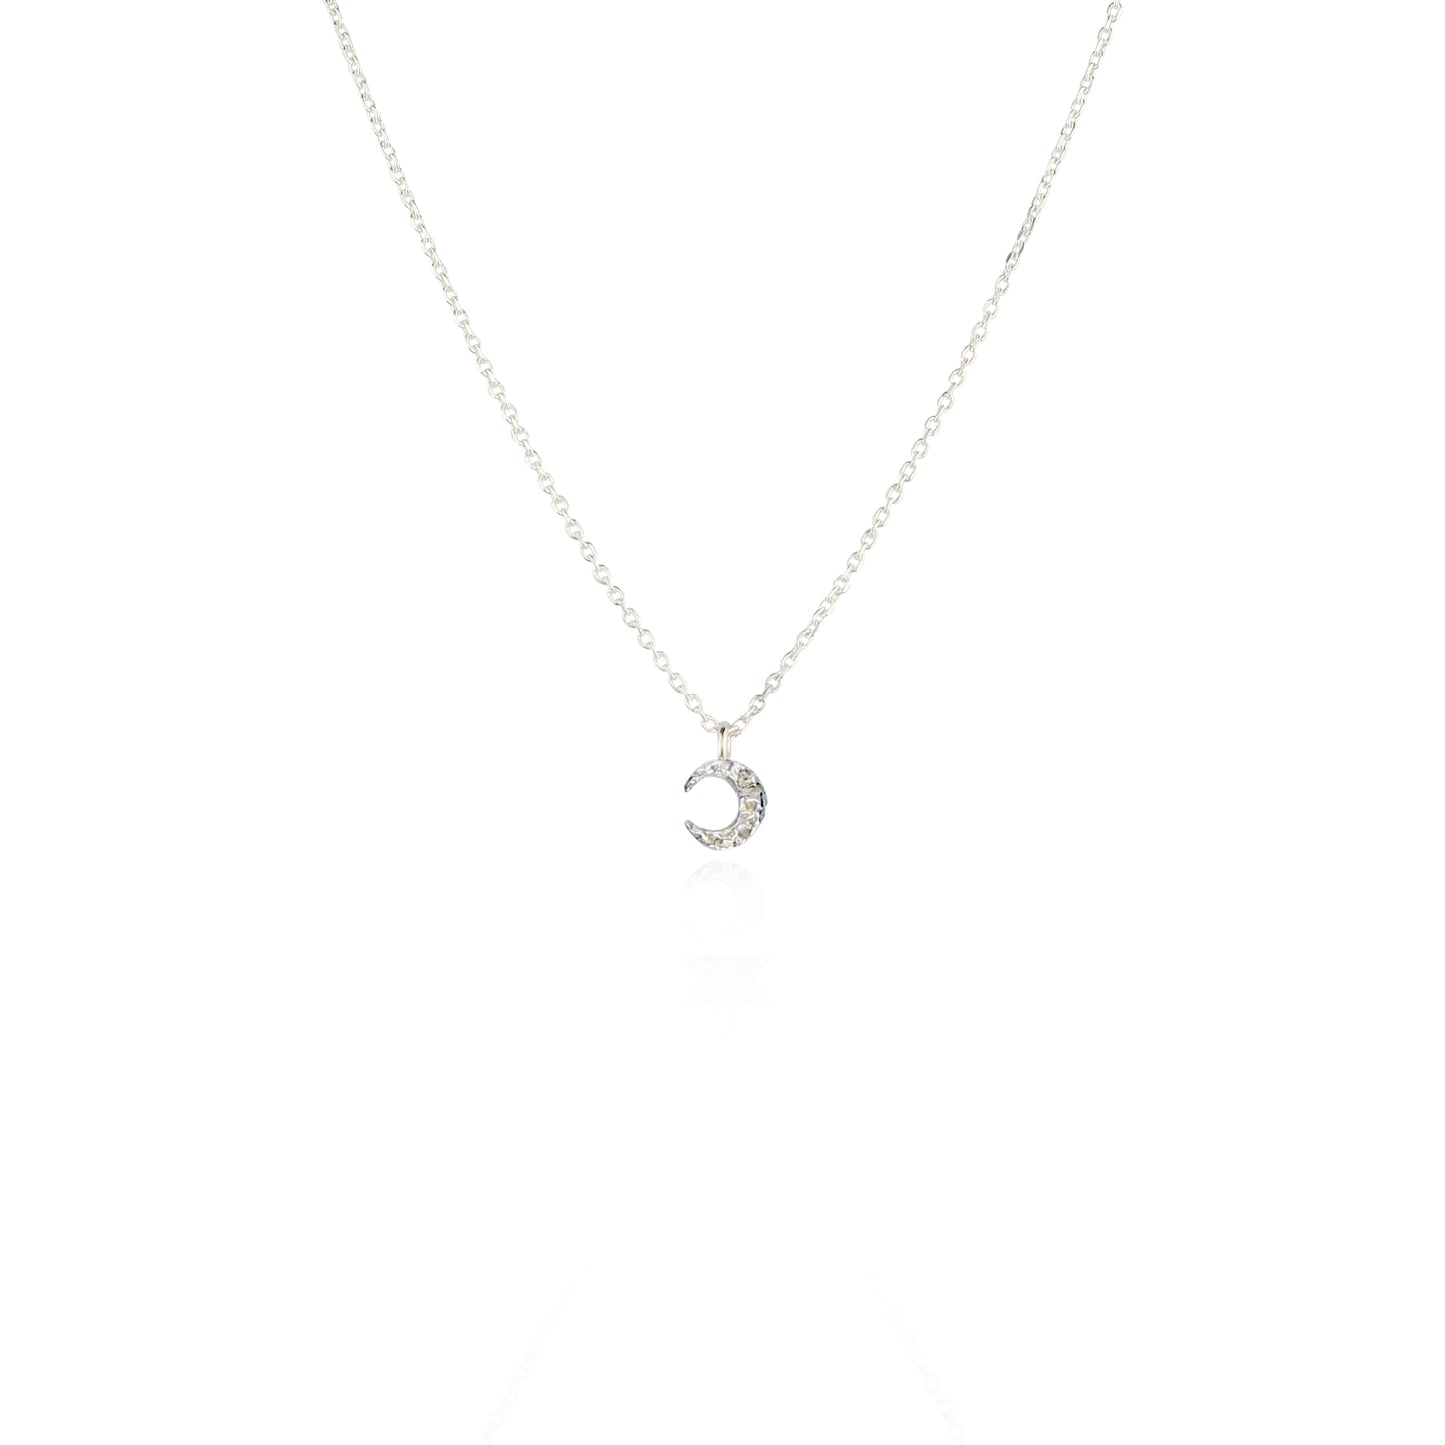 Micro Crescent Moon Necklace